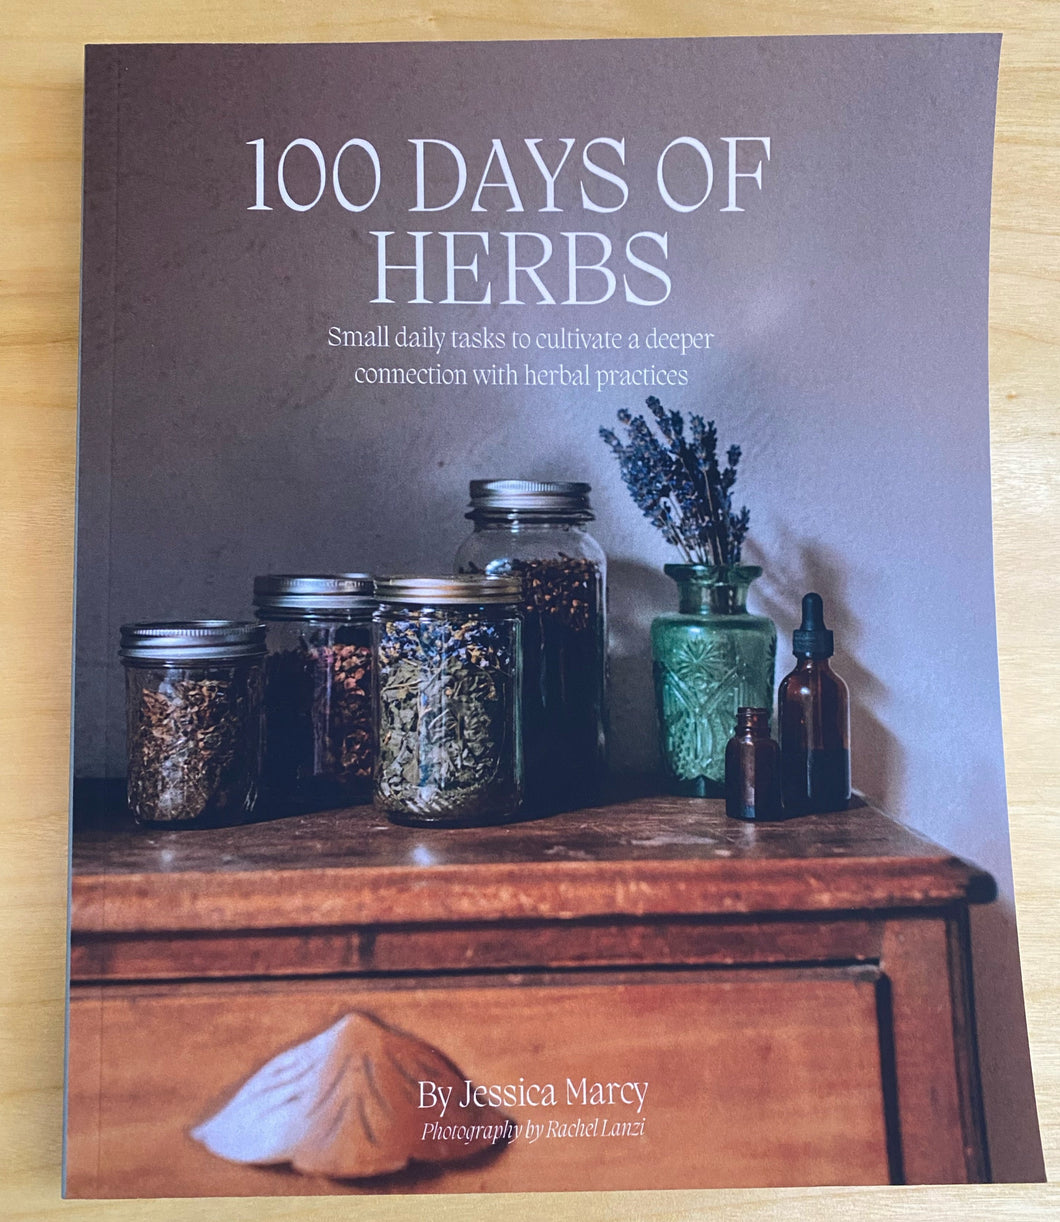 100 Days of Herbs (8 meals)